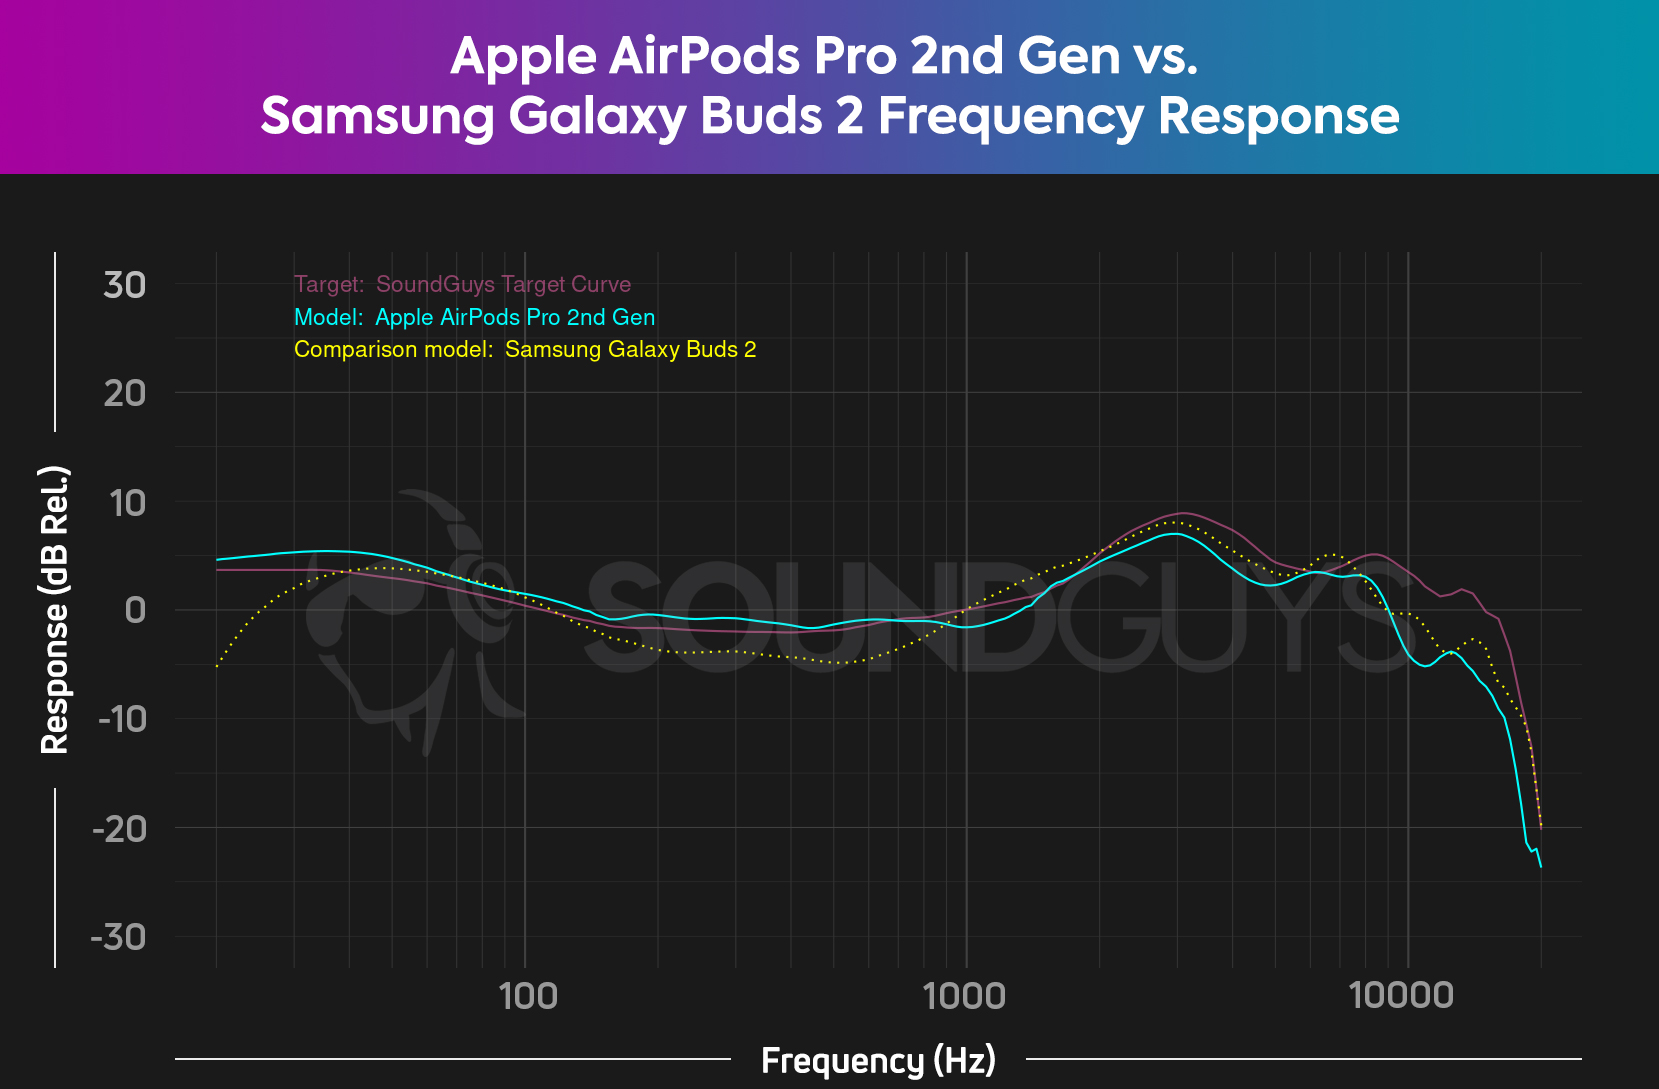 The Apple AirPods Pro do a better job adhering to the SoundGuys Target Curve, but the Samsung Galaxy Buds 2 aren't bad by any means.